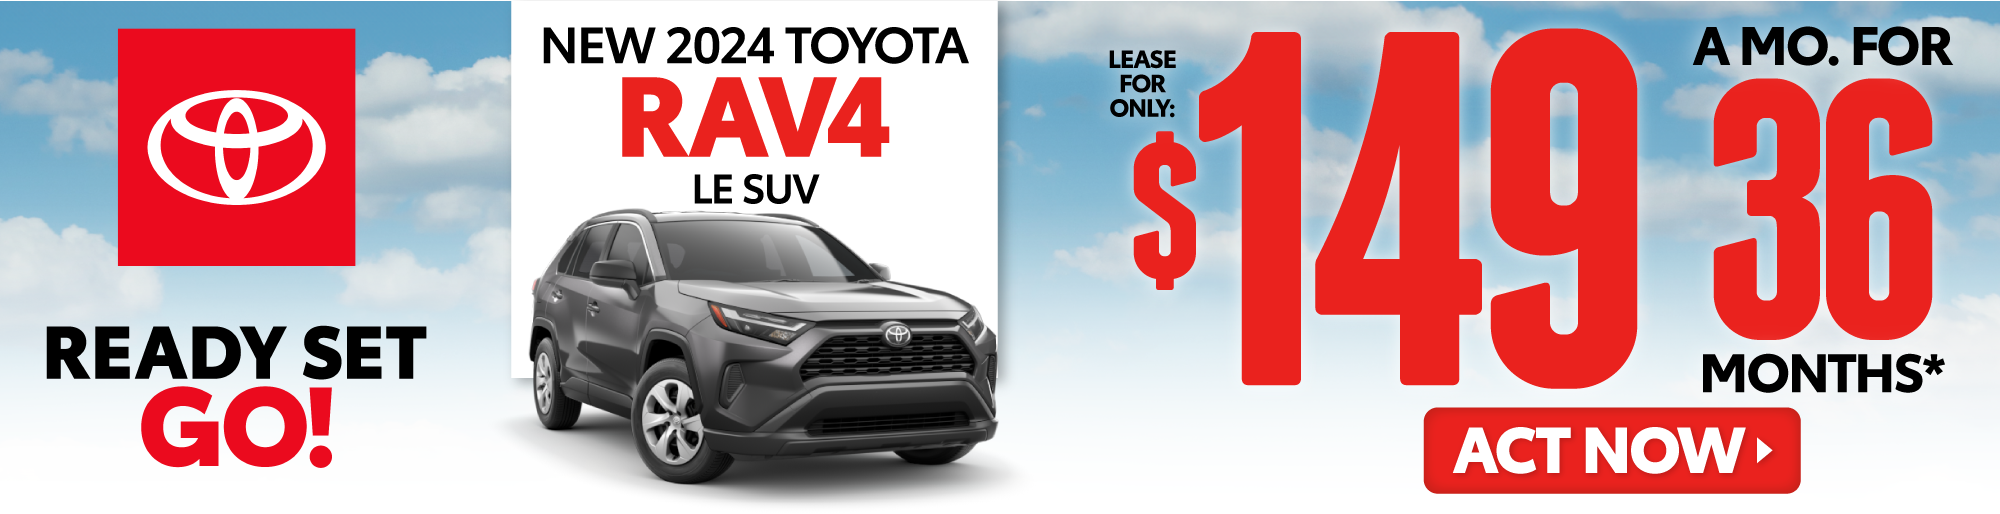 New 2023 Toyota RAV4 LE SUV Lease for only $149/mo.* ACT NOW